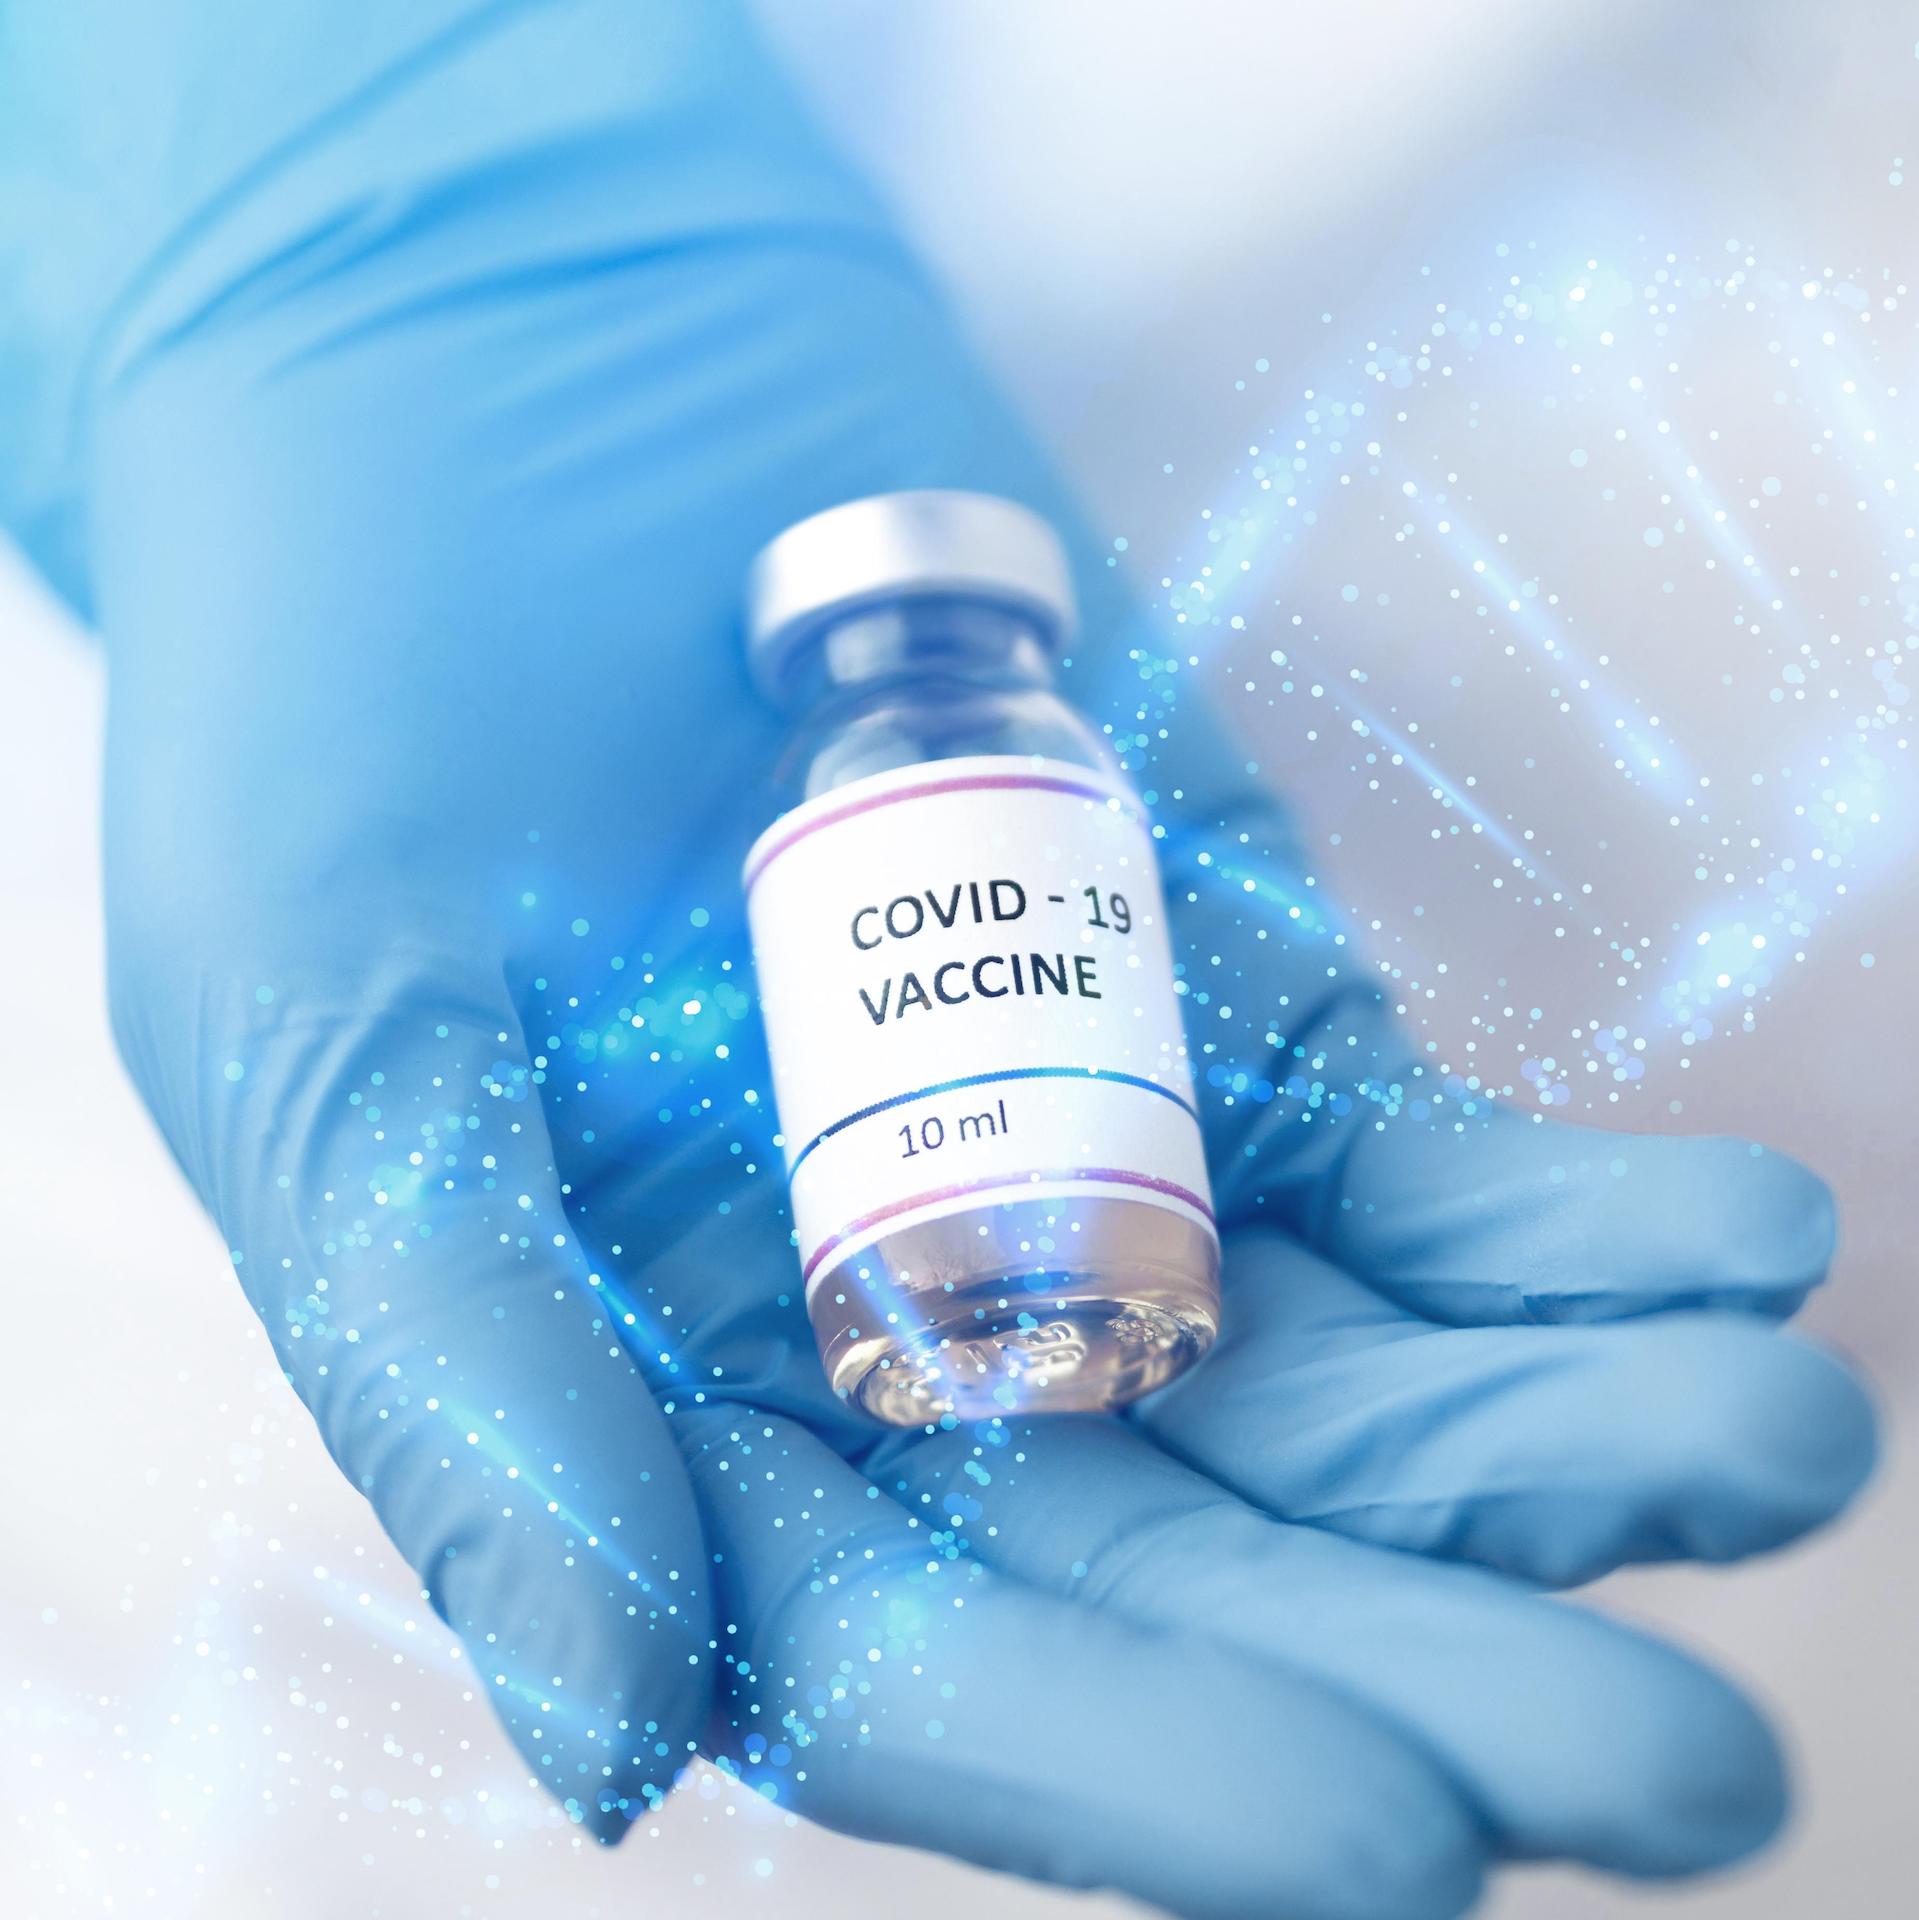 Blue-gloved hand holding a Covid-19 vaccine vial